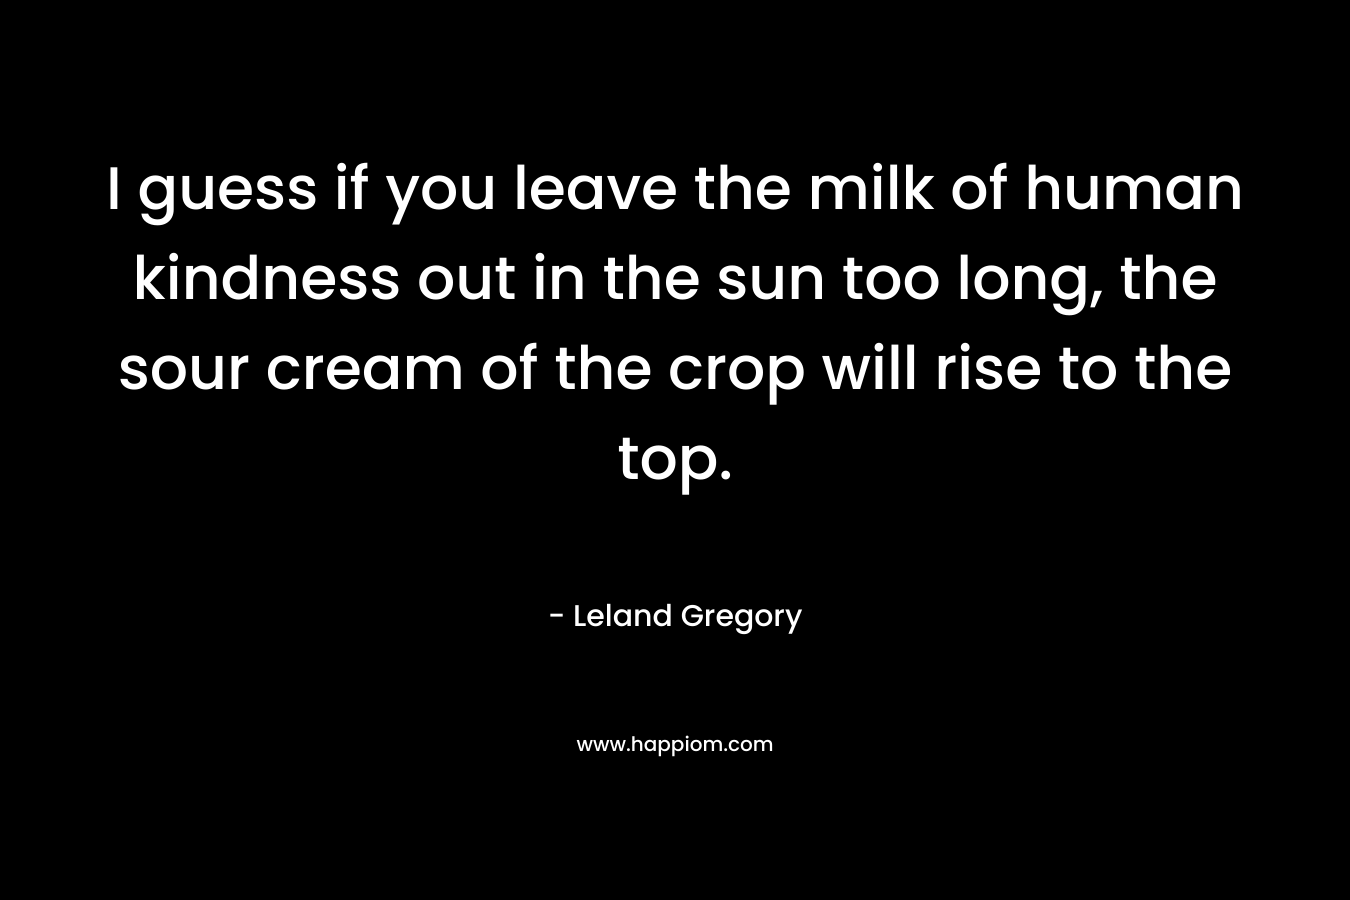 I guess if you leave the milk of human kindness out in the sun too long, the sour cream of the crop will rise to the top. – Leland Gregory